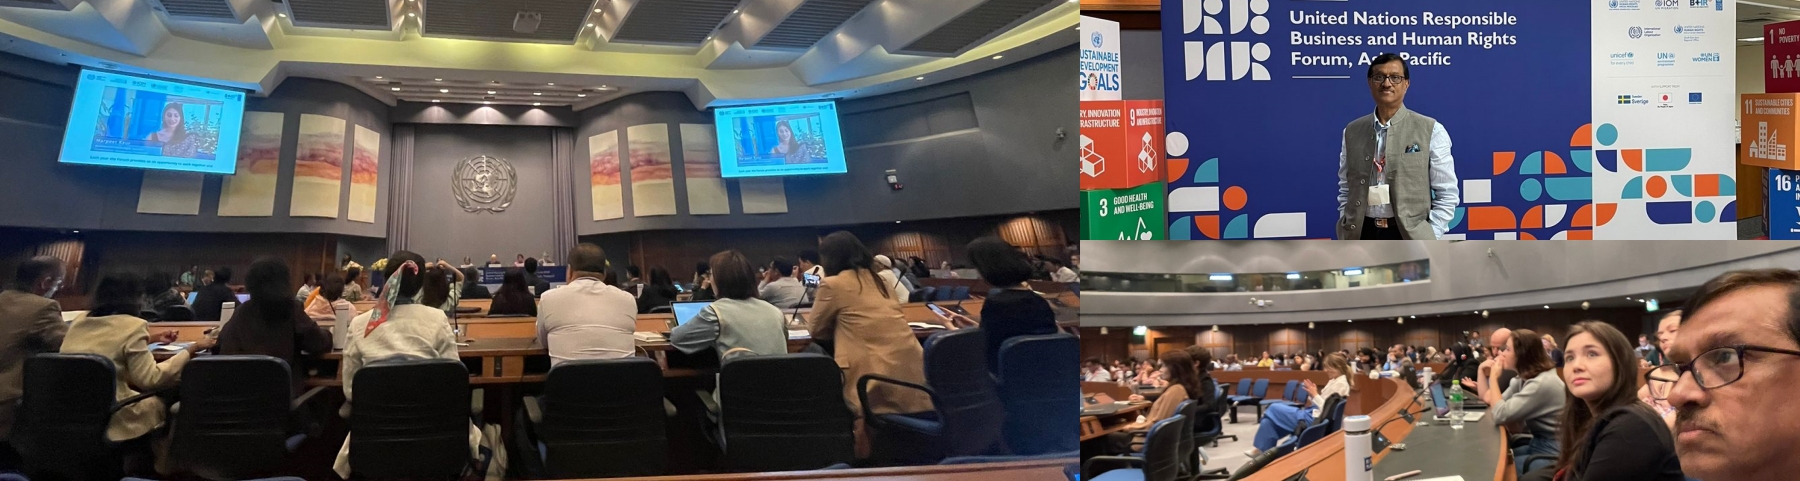 Dr. Dnyaneshwar M. Mulay, Member, NHRC attending the Plenary Session at UN Responsible Business & Human Rights Forum, Asia Pacific on 07.06.2023 in Bangkok